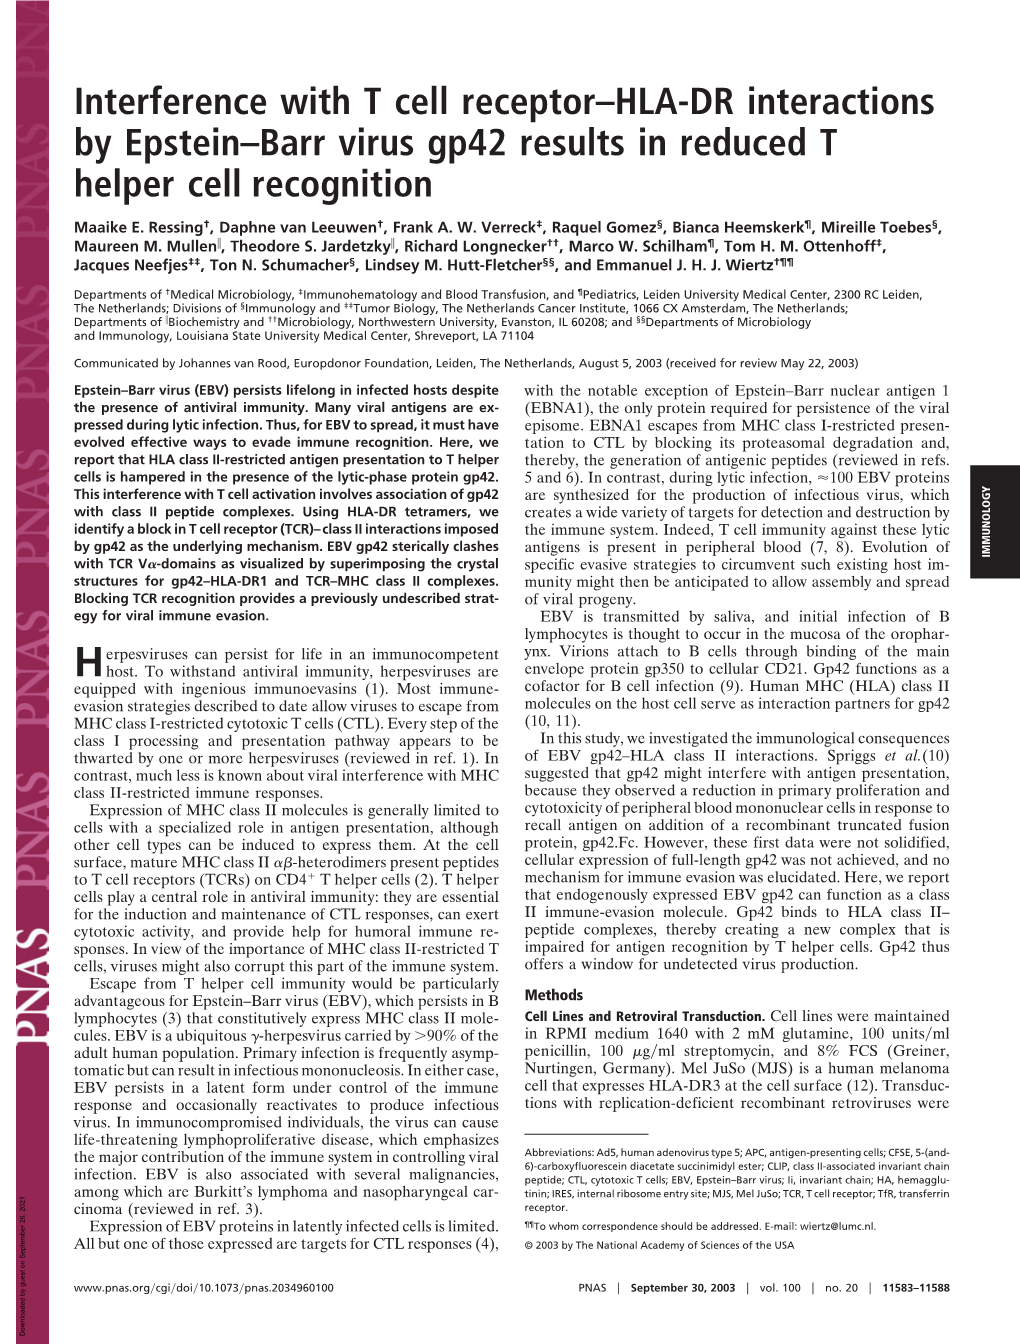 Interference with T Cell Receptor–HLA-DR Interactions by Epstein–Barr Virus Gp42 Results in Reduced T Helper Cell Recognition